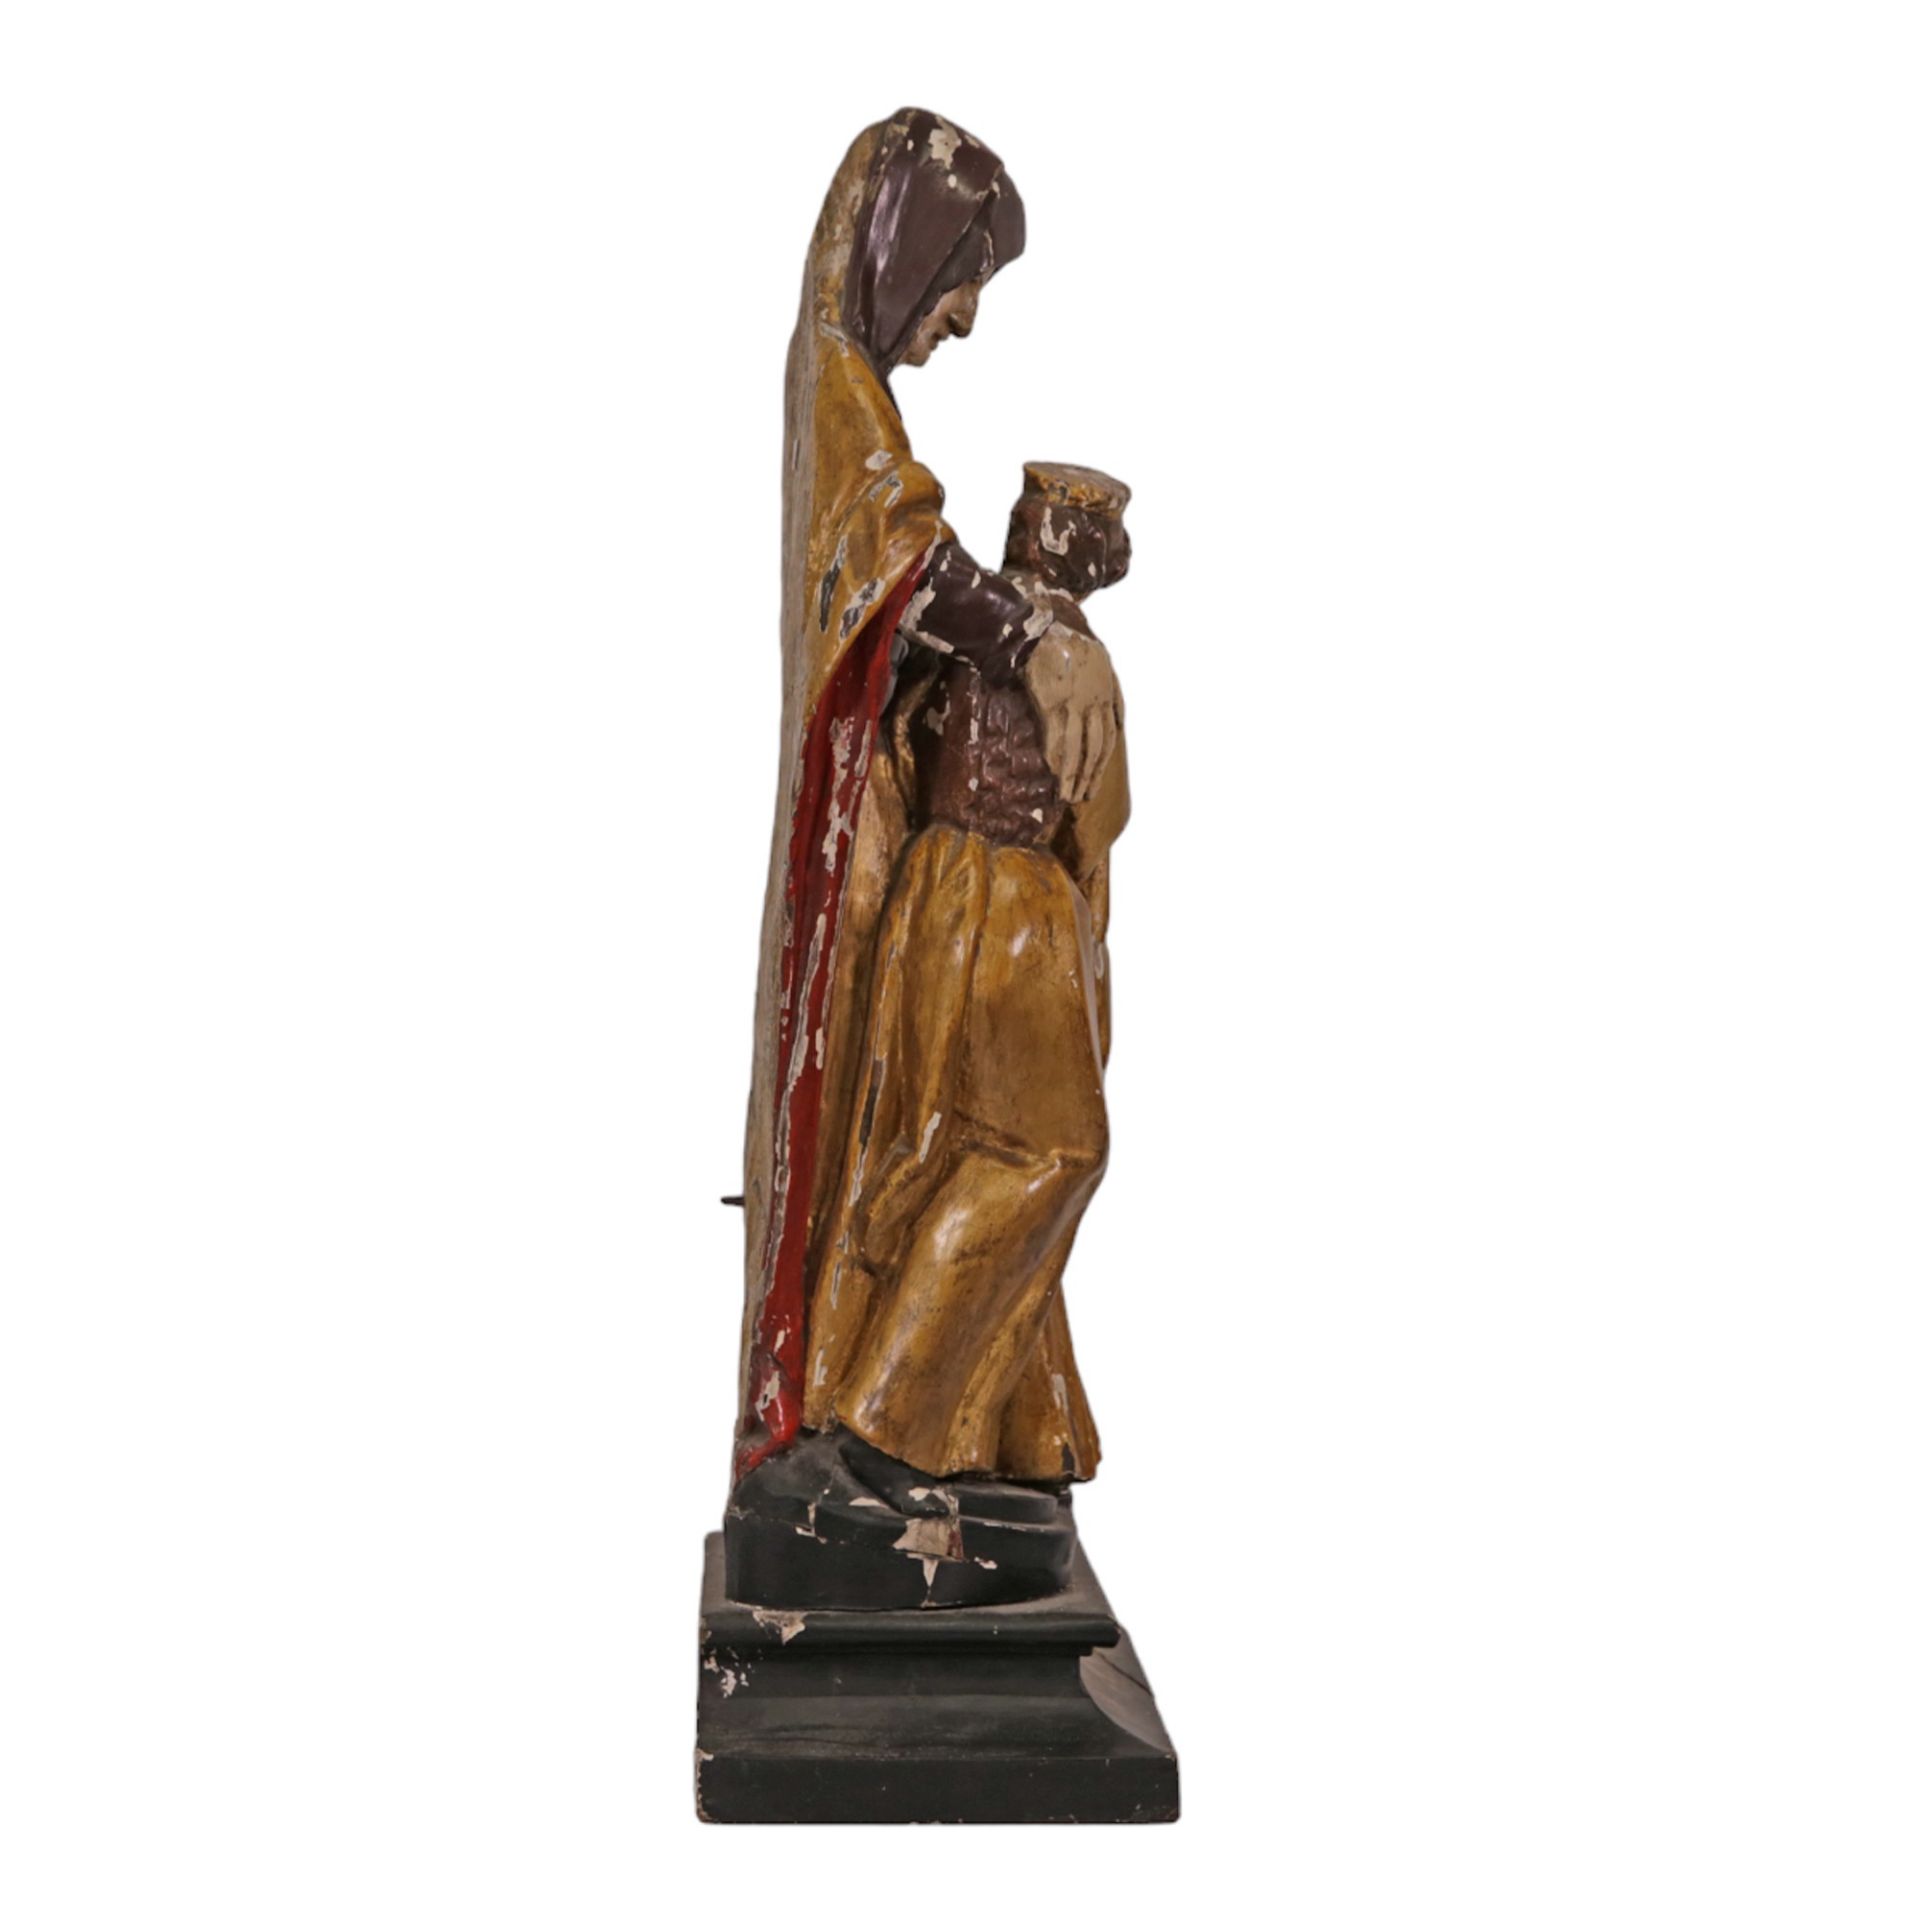 RARE, ANTIQUE, POLYCHROME WOODEN SCULPTURE "SAINT ANNE TRINITI", ON THE BASIS. FRANCE 19th CENTURY. - Image 9 of 13